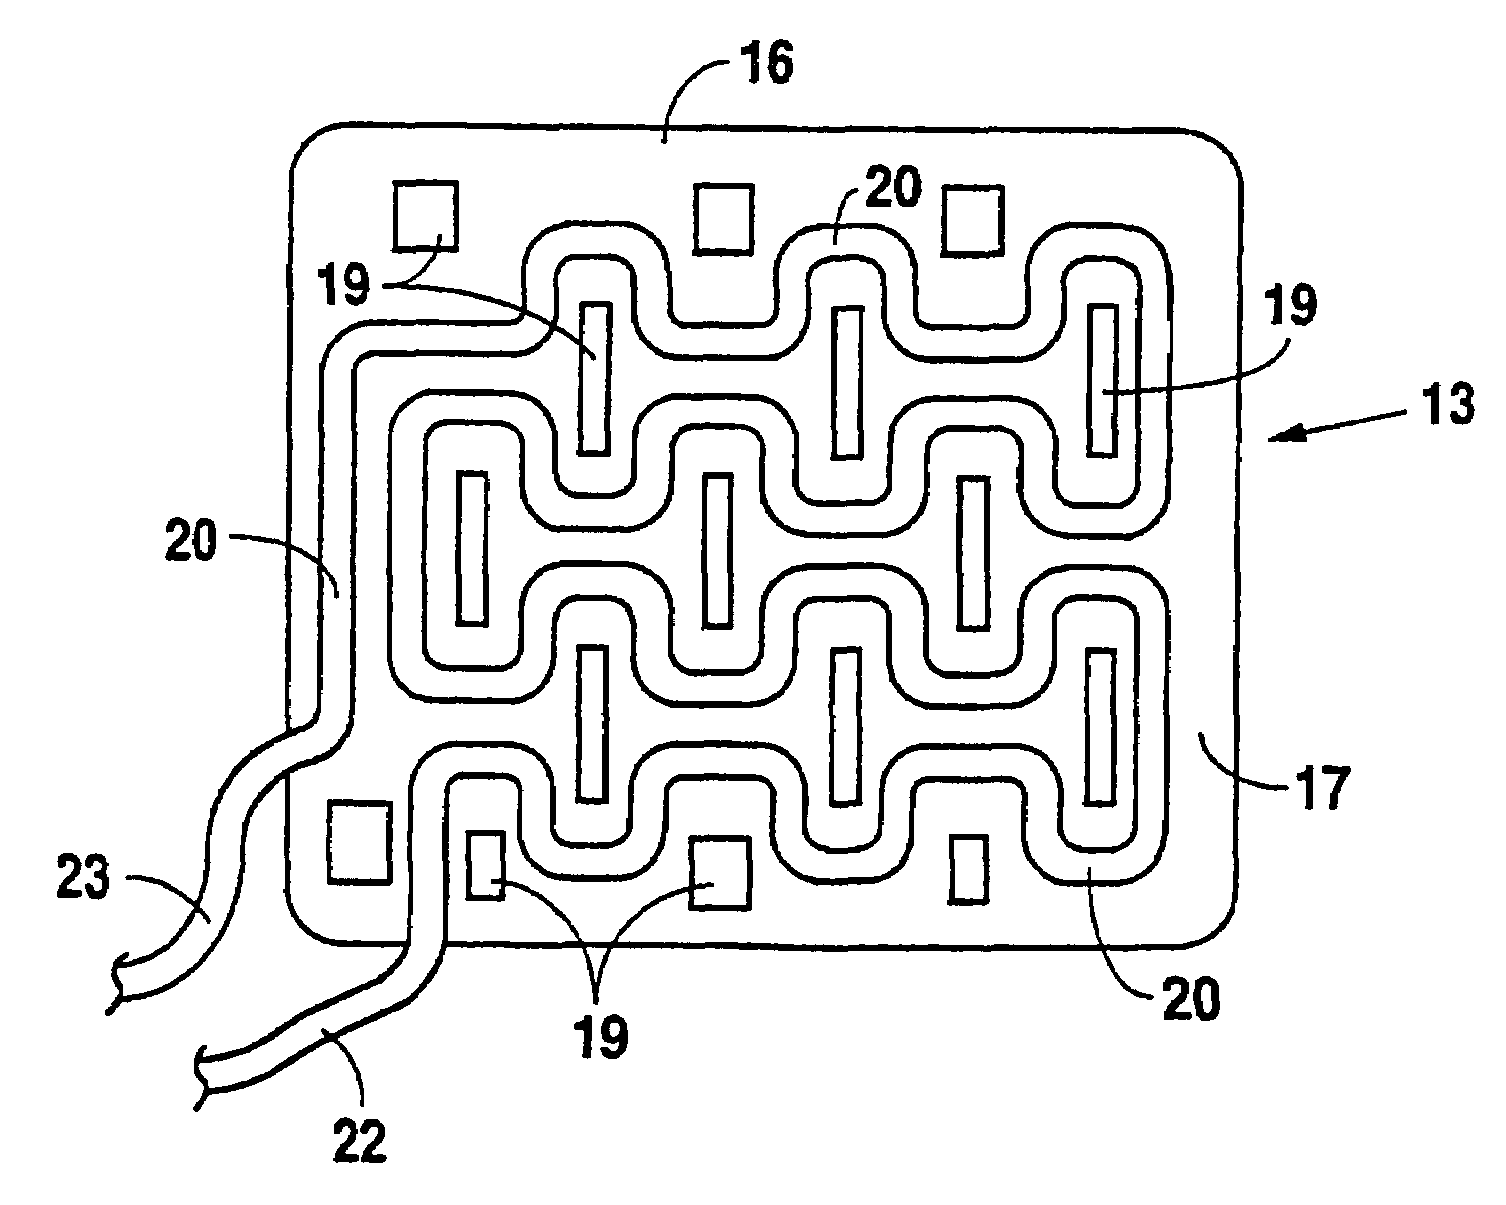 Negative pressure treatment system with heating and cooling provision